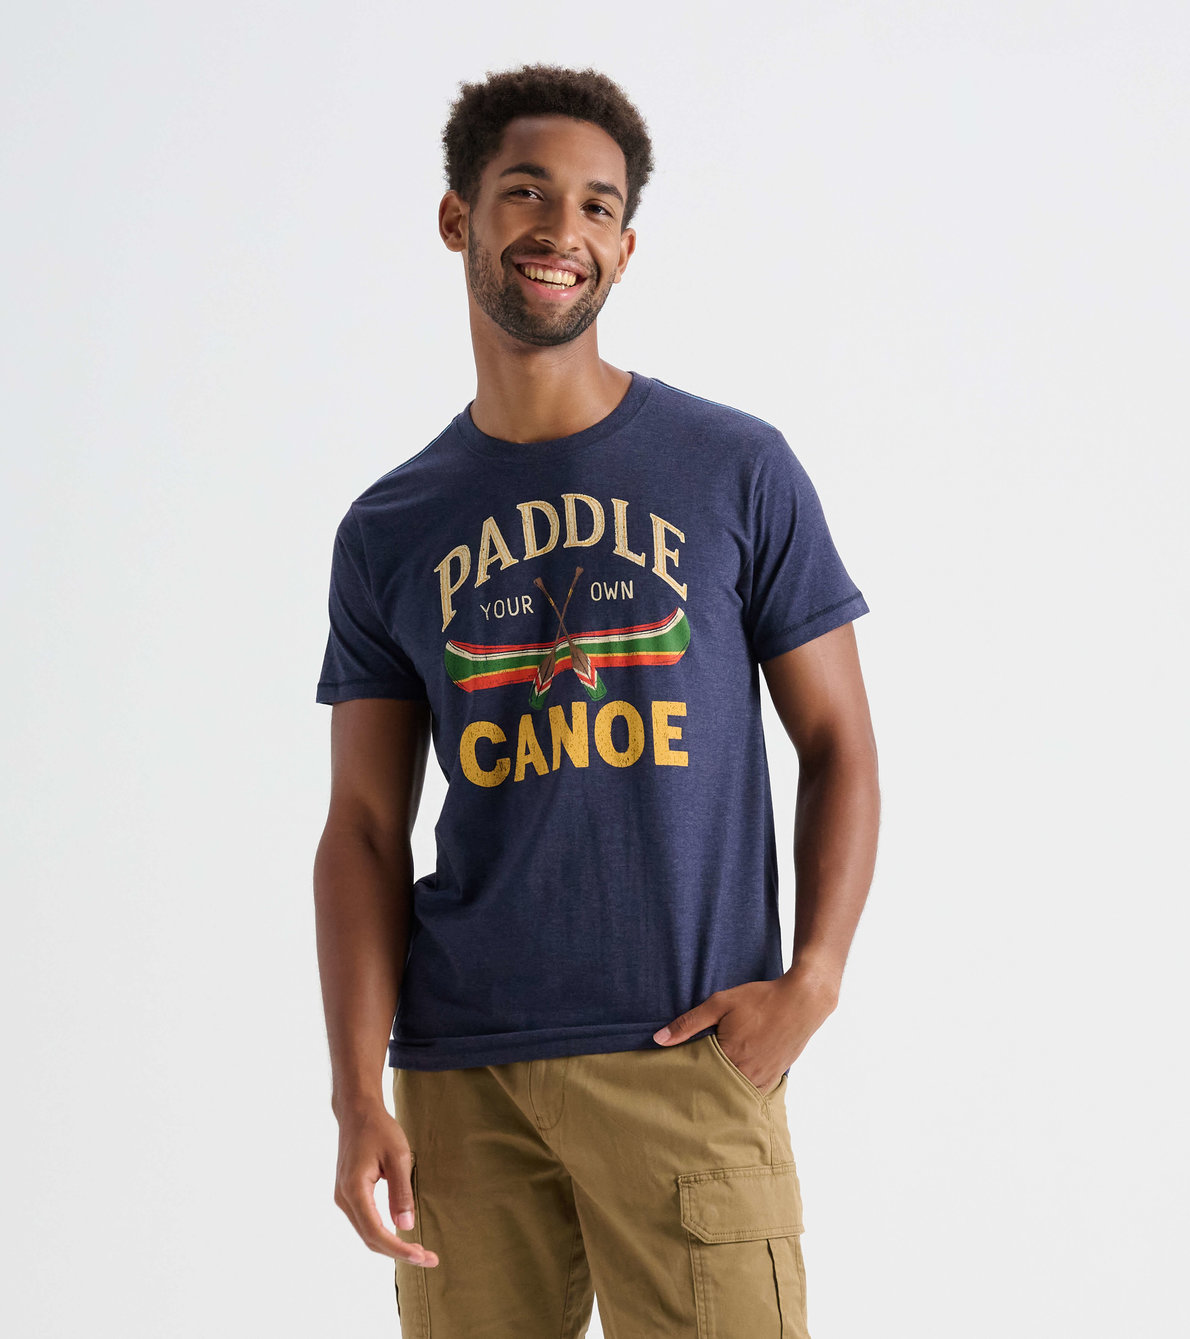 View larger image of Paddle Your Own Canoe Men's Tee